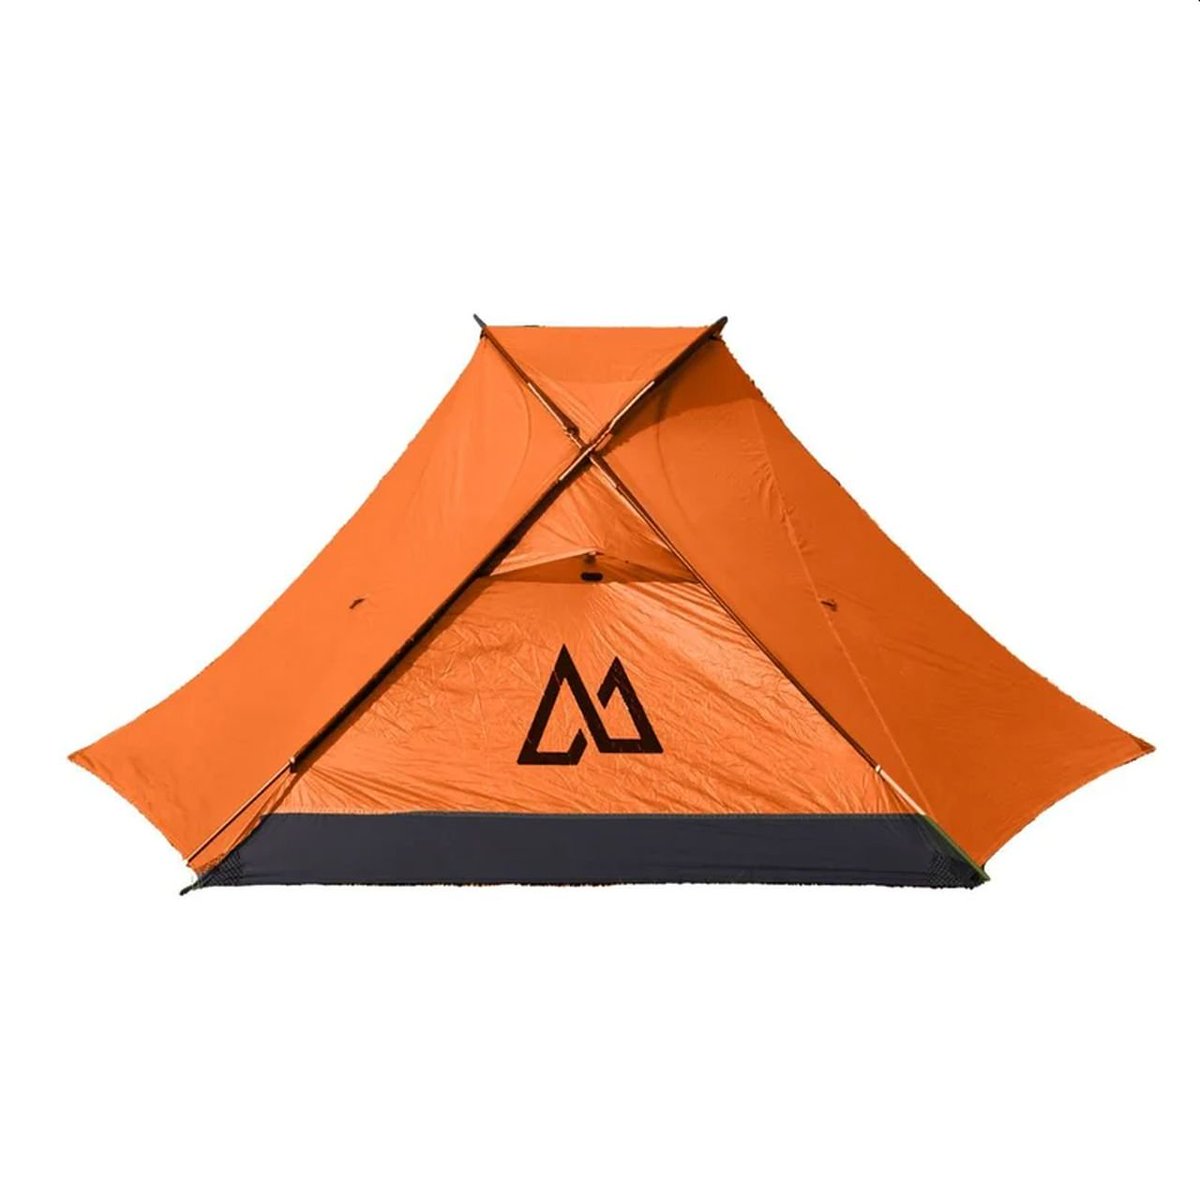 Ultralightweight Elite 2 Tent is Built to Comfort Your Stay in Extreme Weather
Read Post: homecrux.com/elite-2-tent-b…